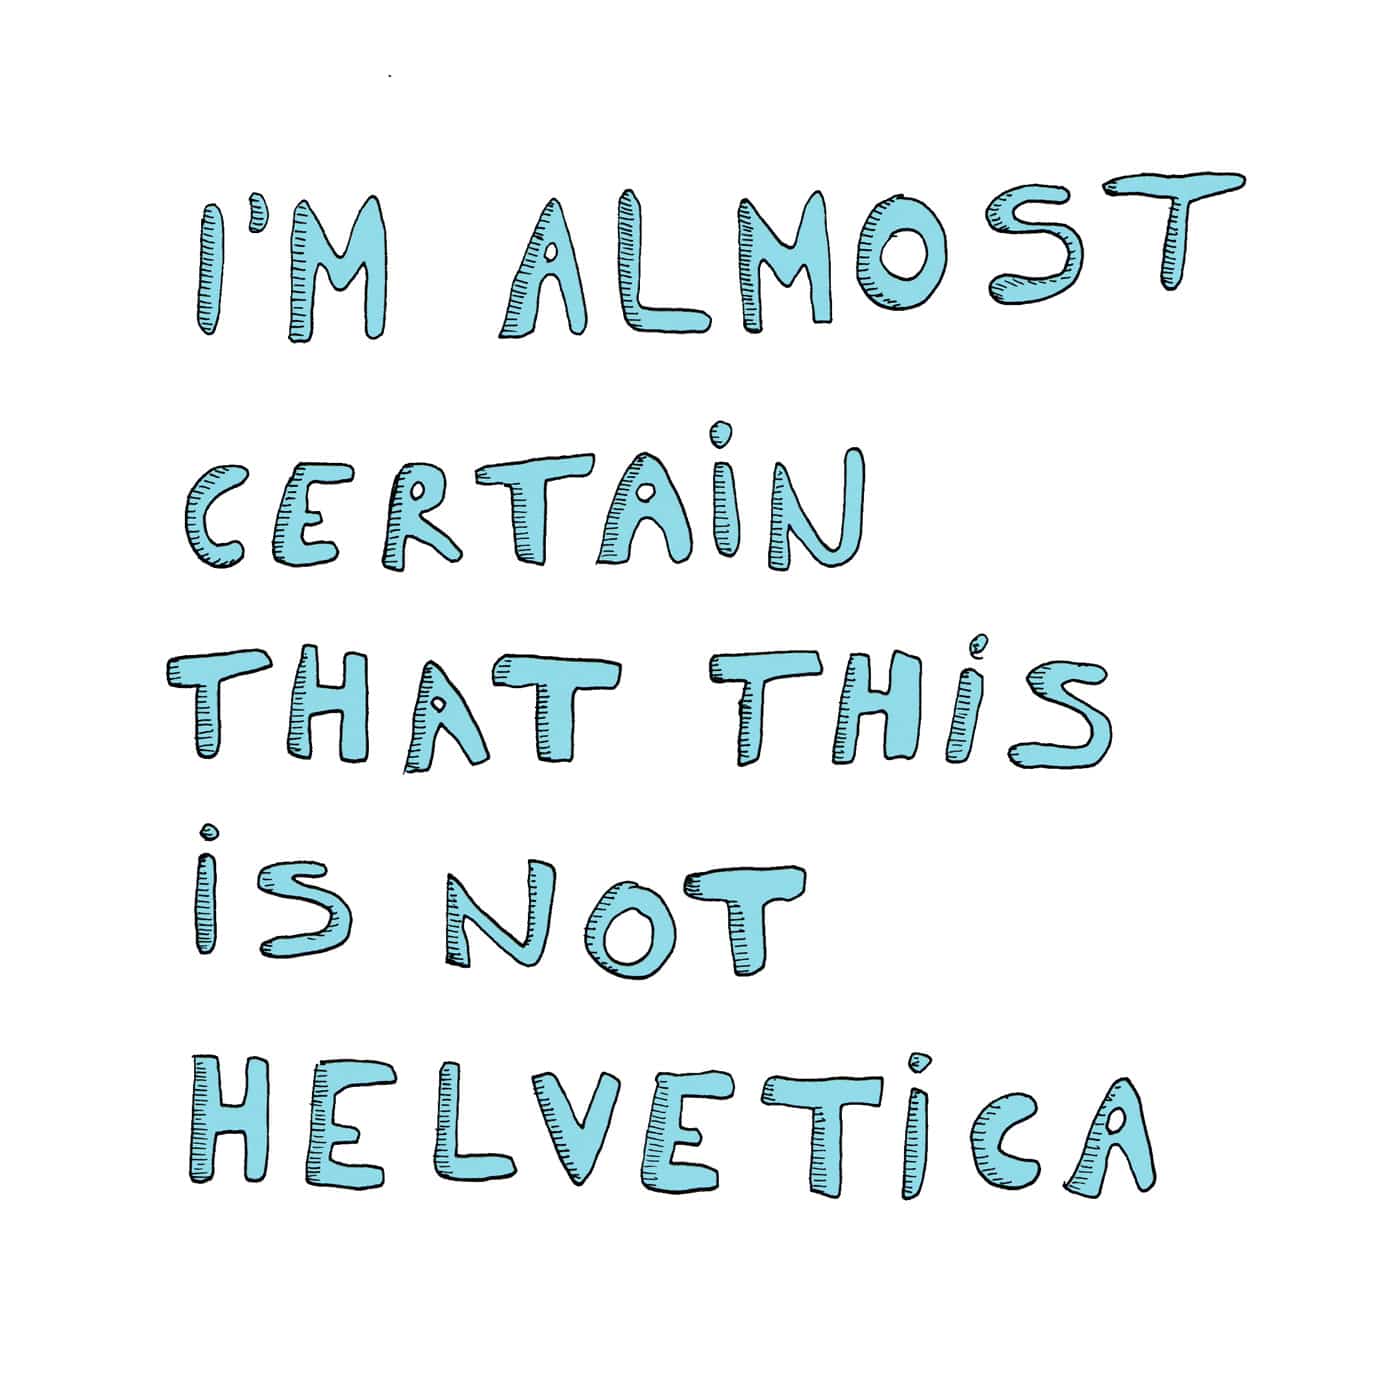 I'm almost certain that this is not Helvetica